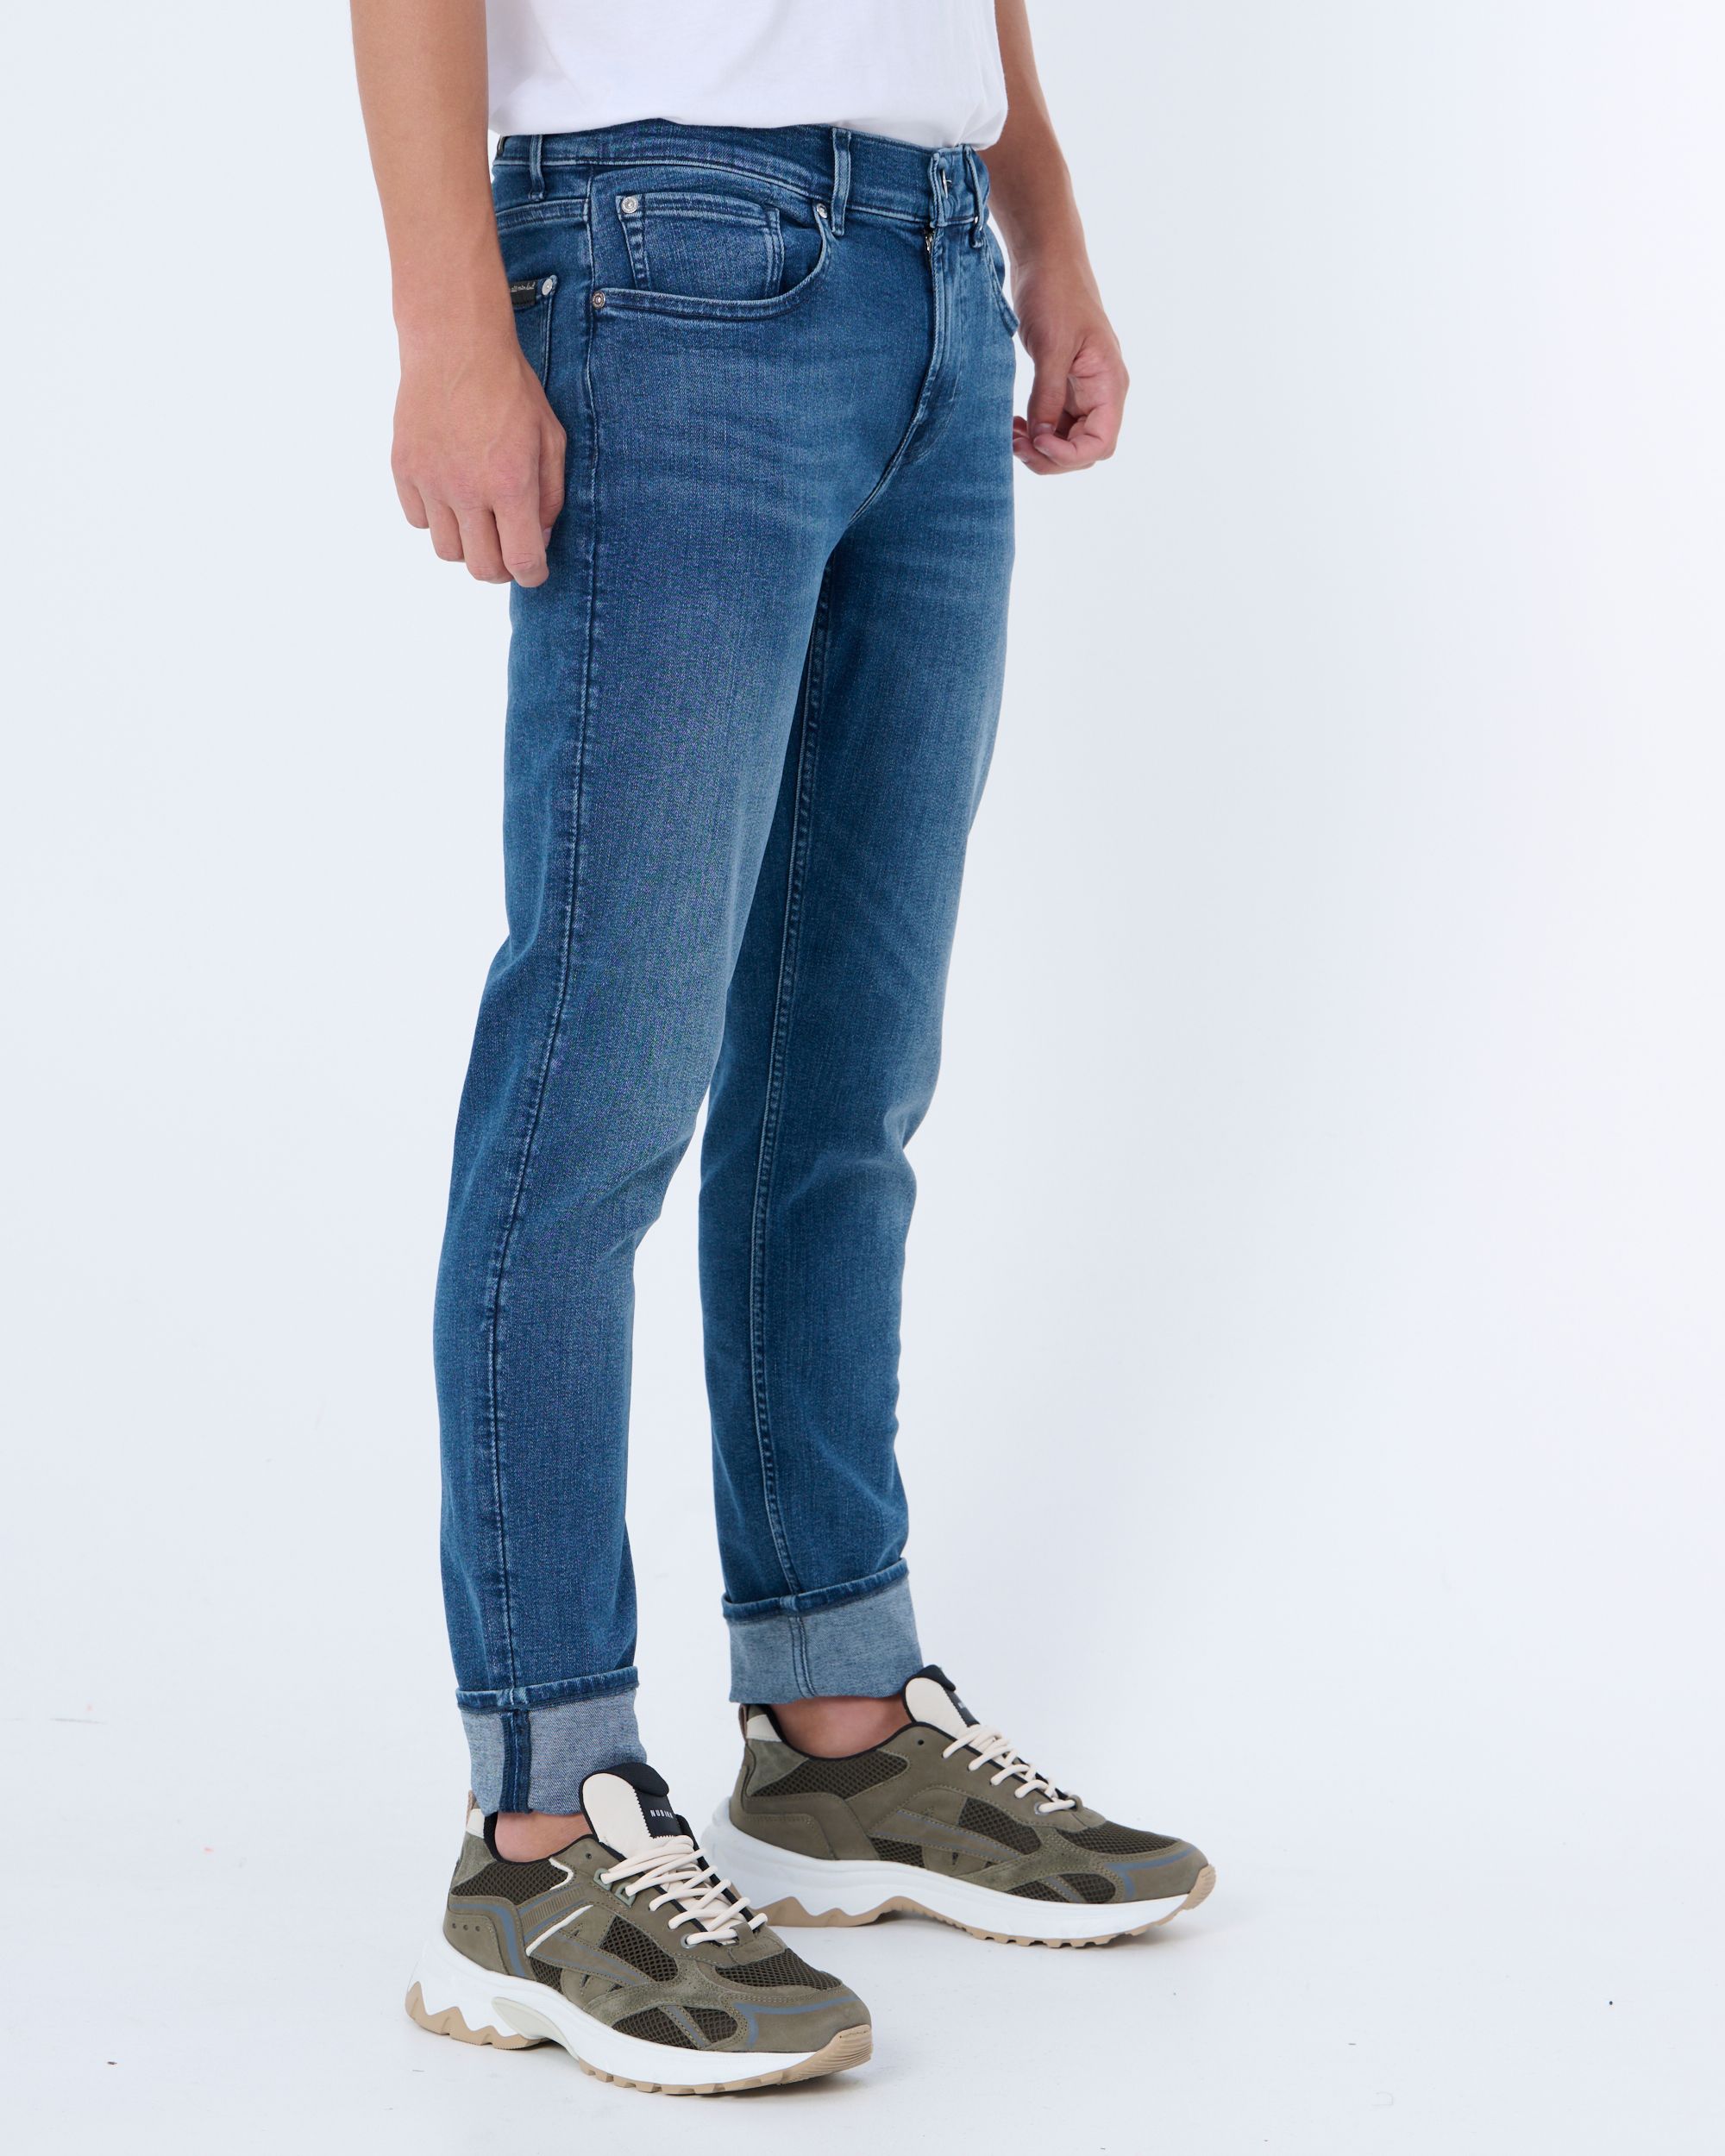 Seven for all mankind Maze Jeans Blauw 089207-001-30